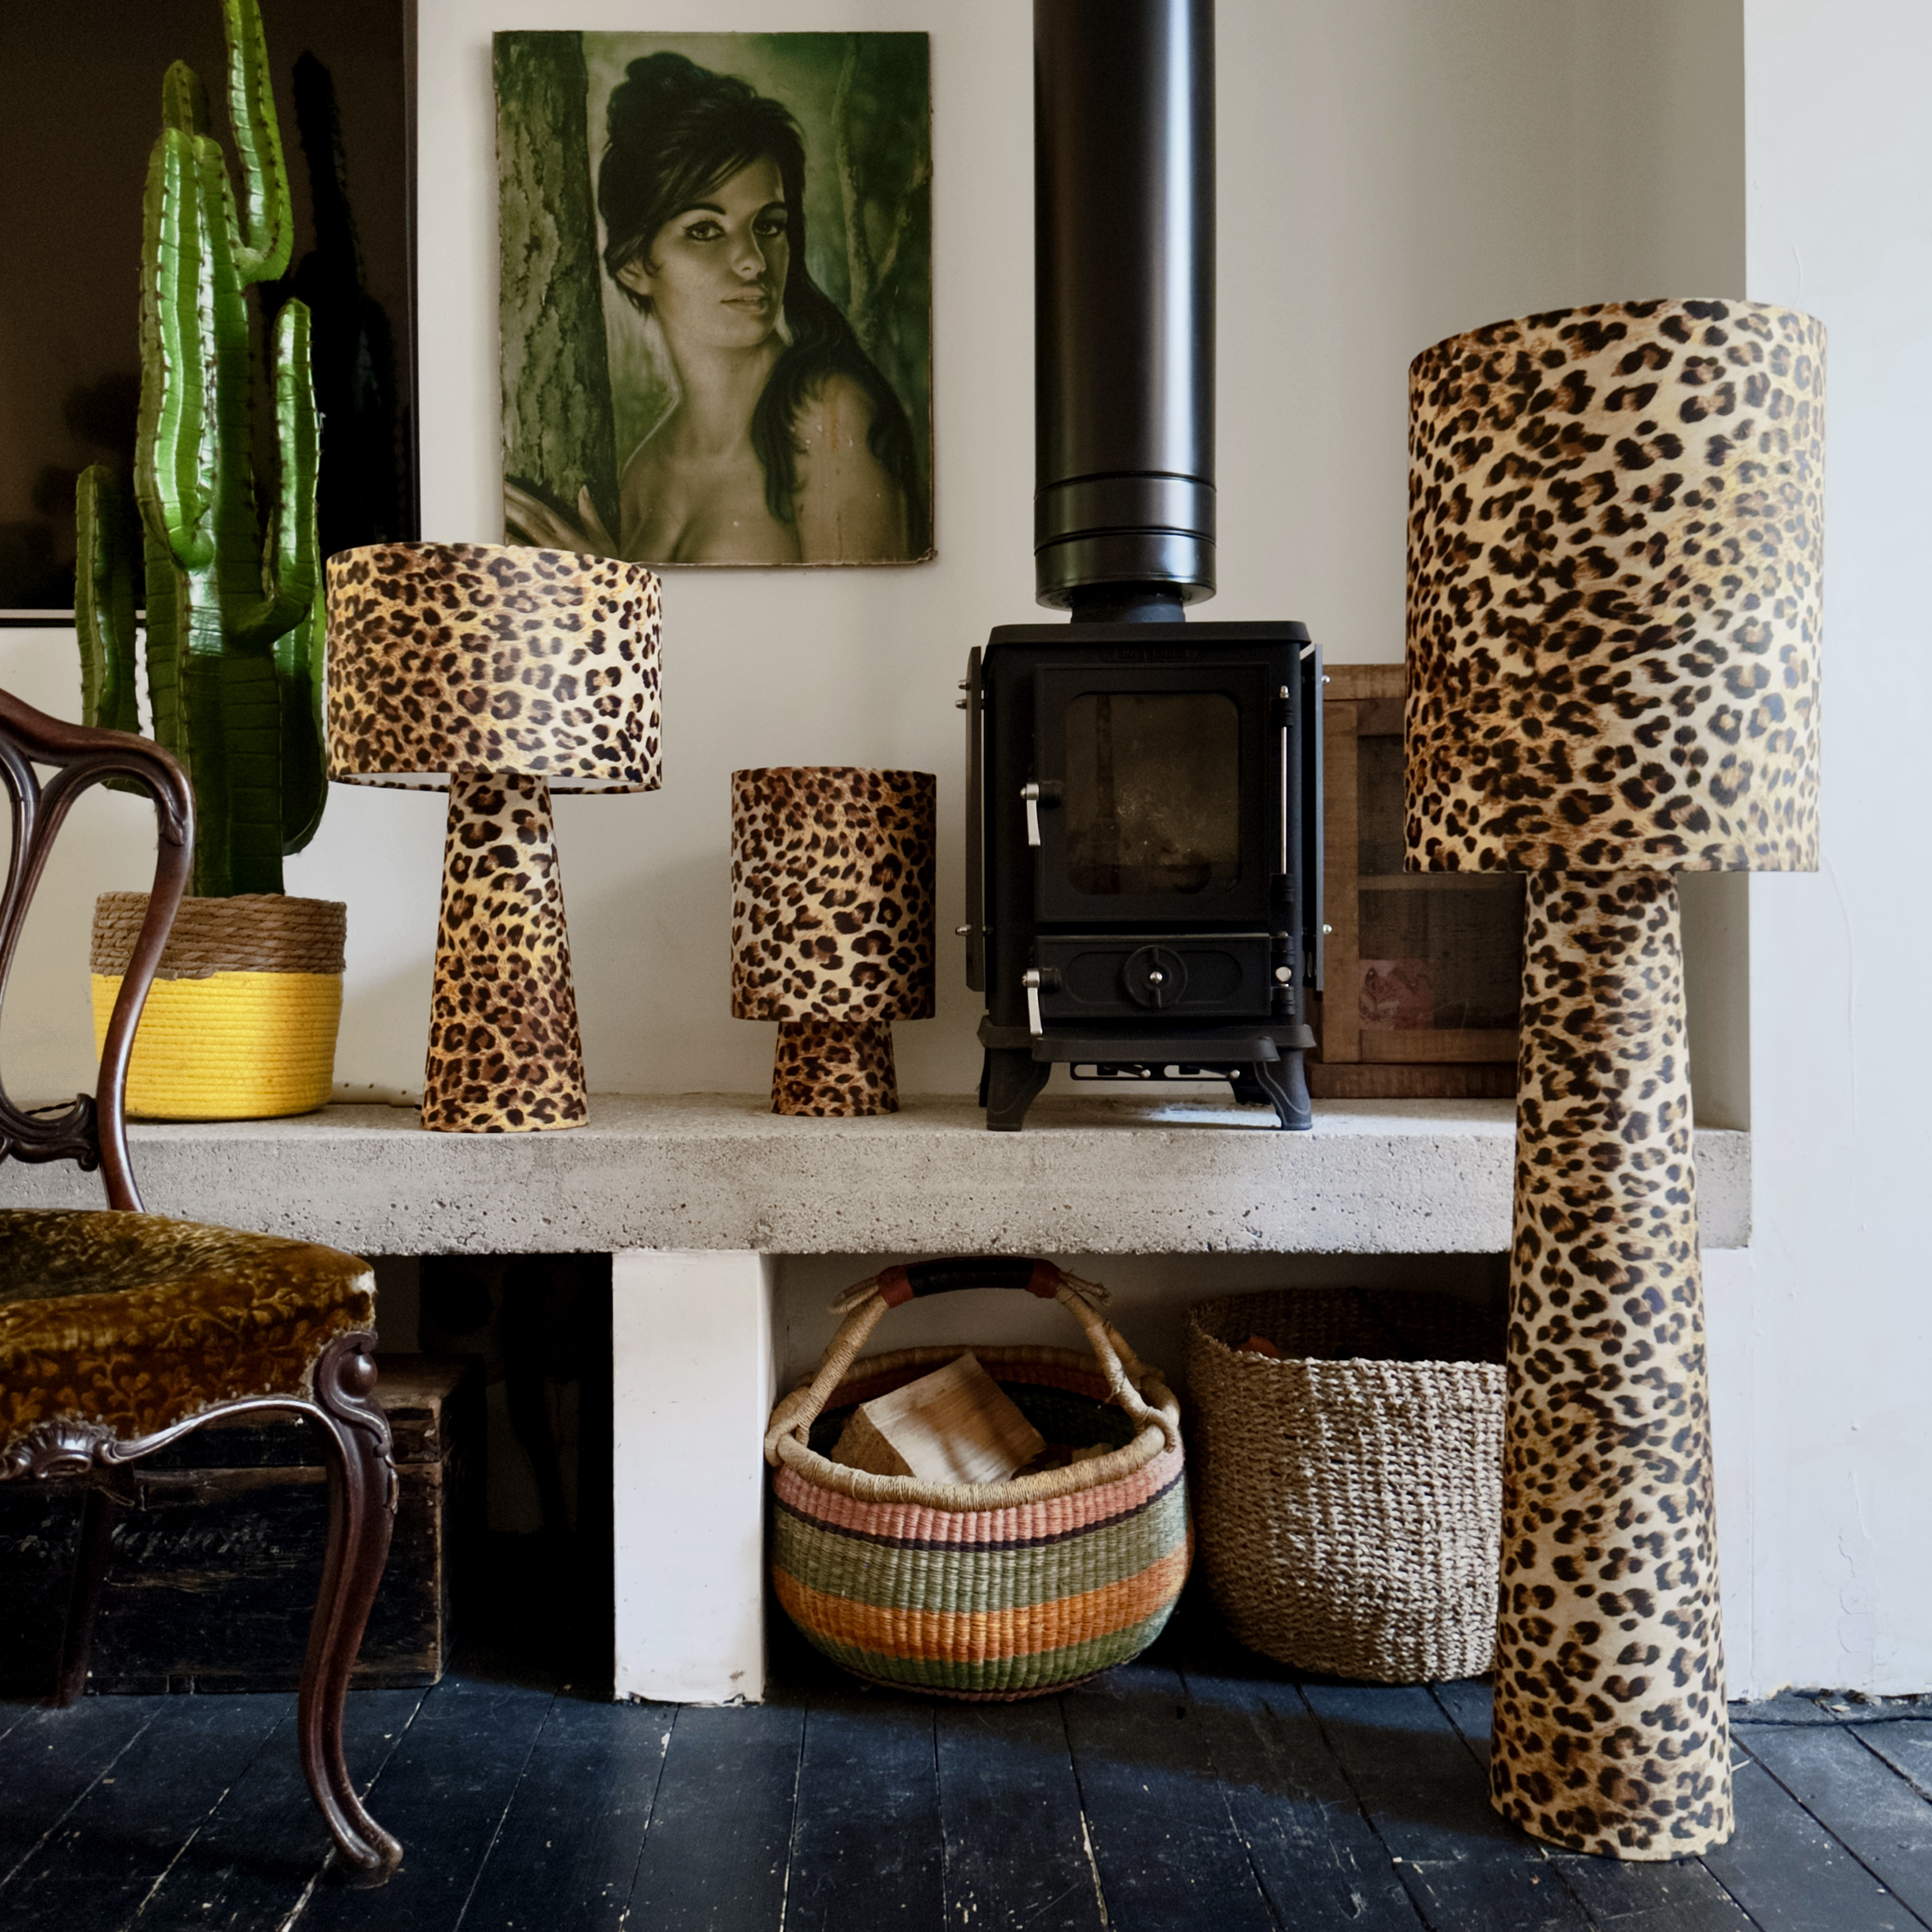 Handmade Luxe Leopard Print Retro Lamps from Love Frankie, shot at the home of Our Creative Director Johanna Franks